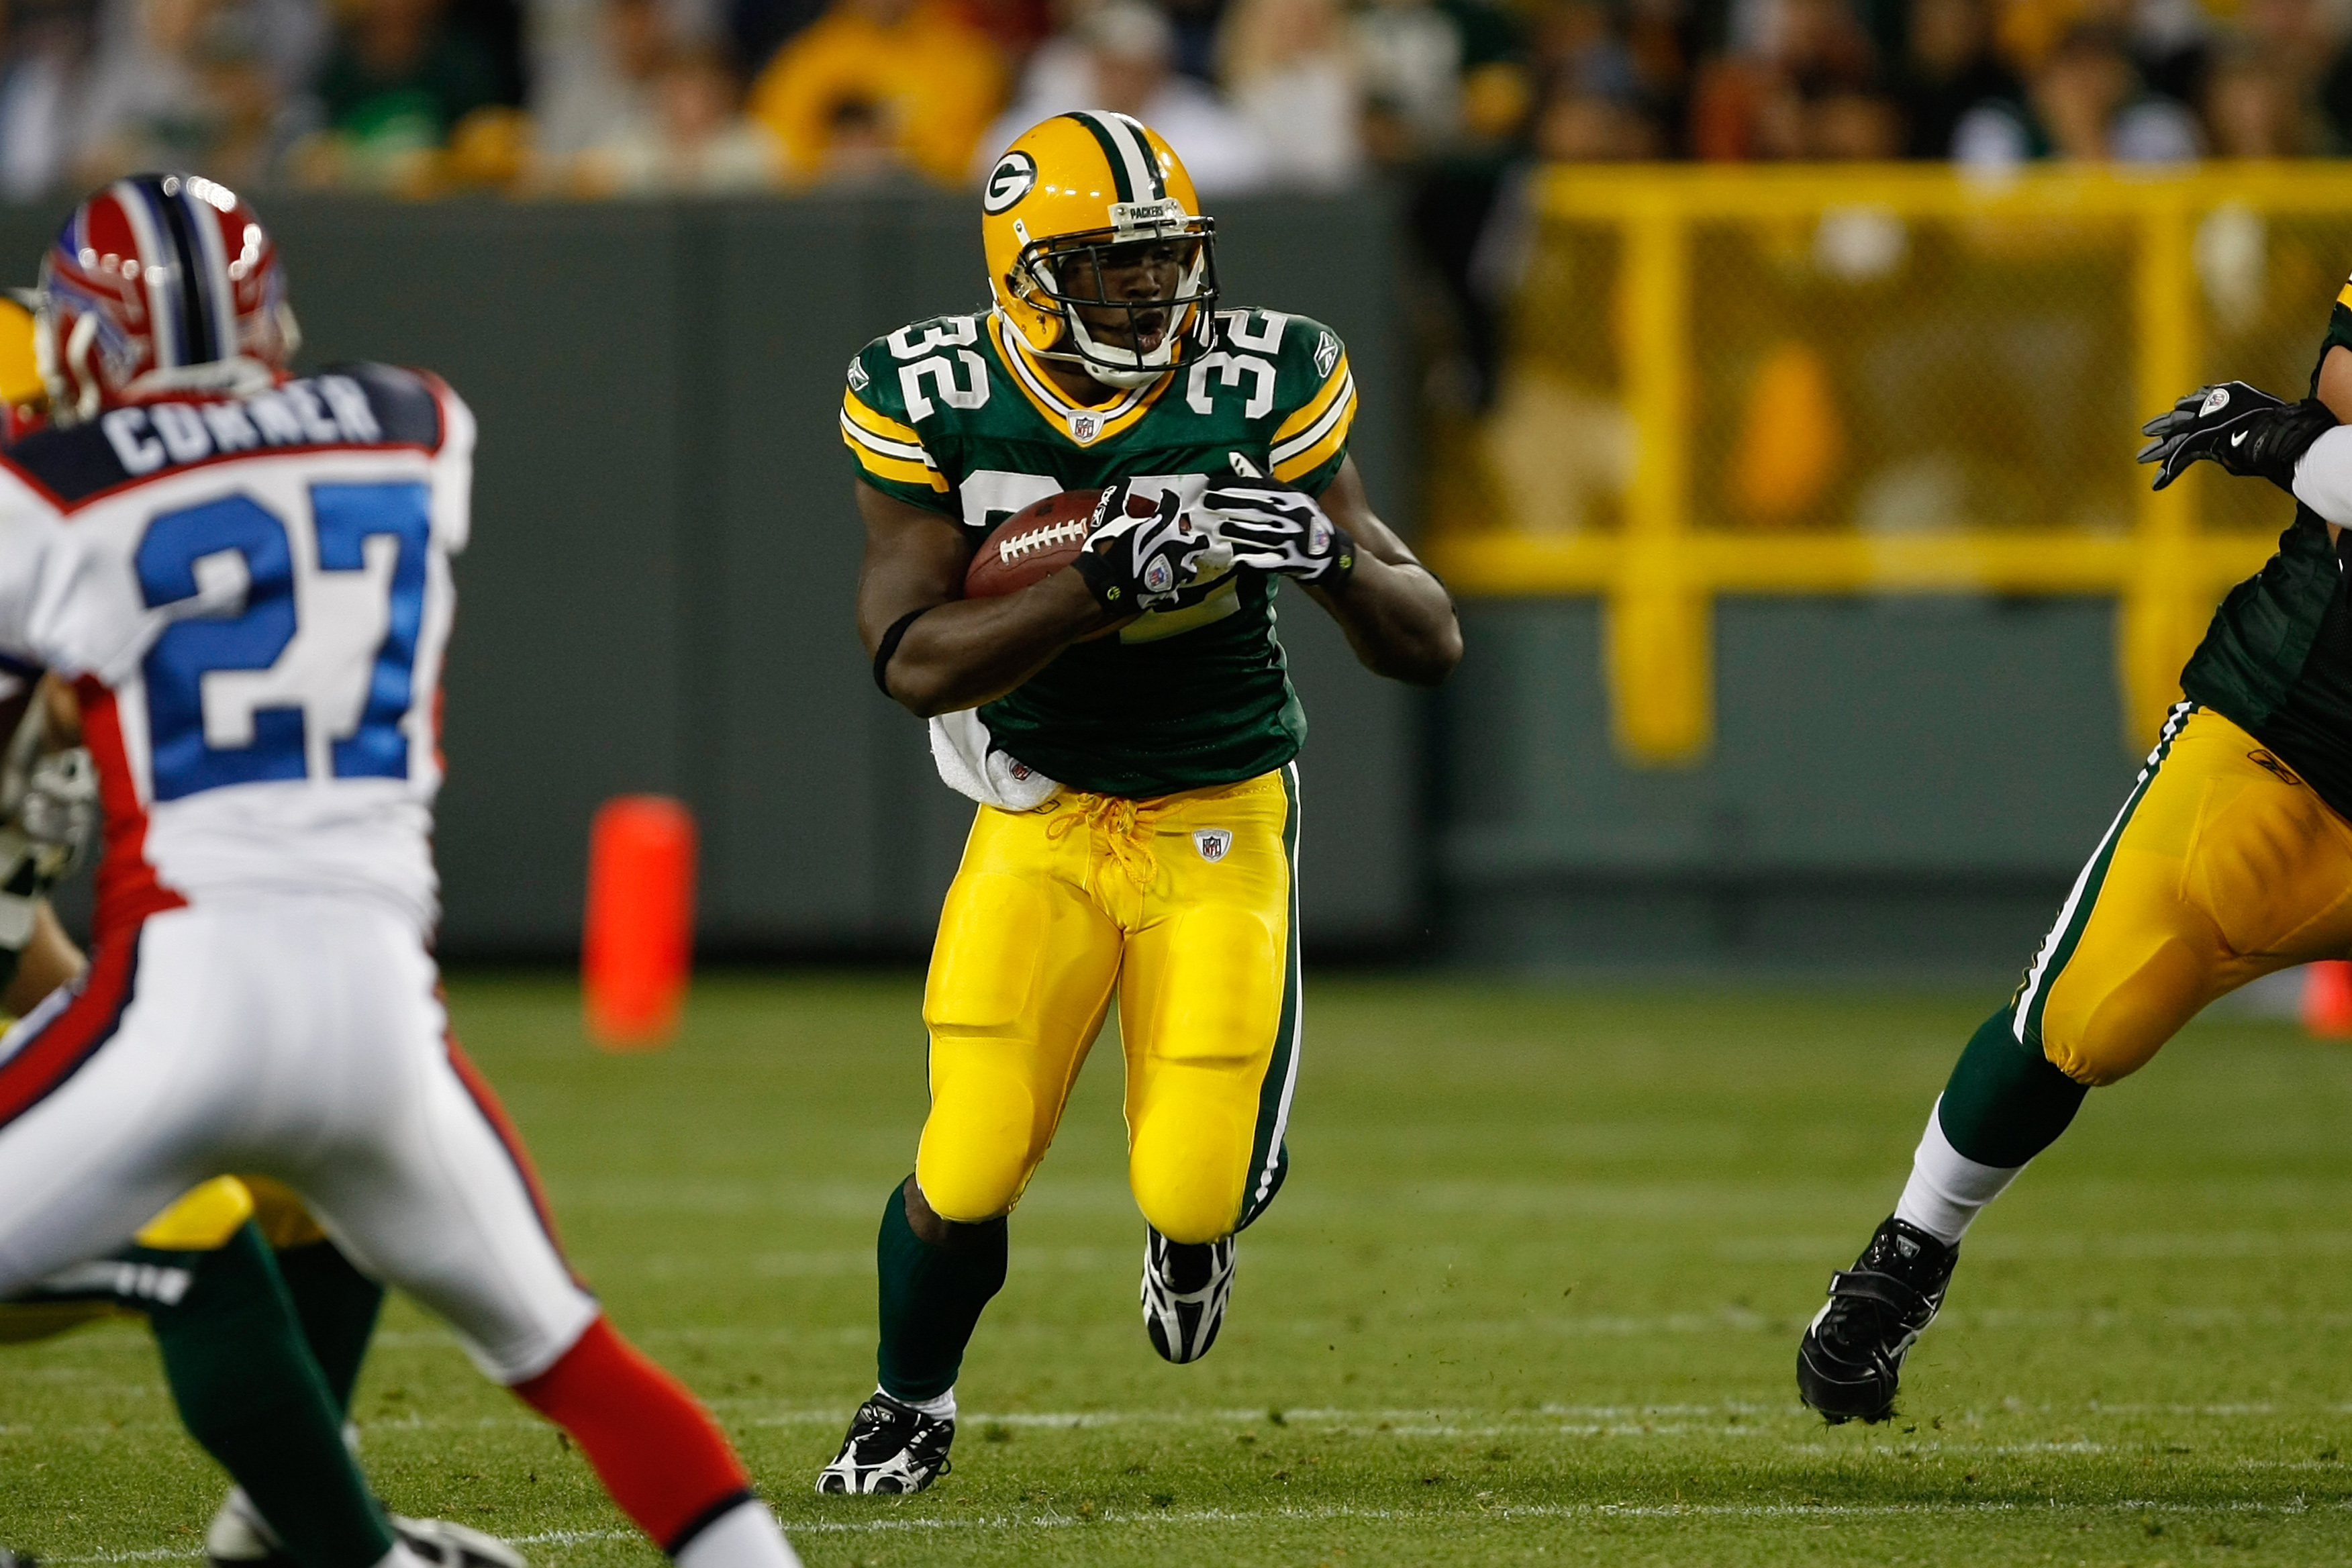 GREEN BAY, WI - AUGUST 22: Running back Brandon Jackson #32 of the Green Bay Packers runs with the football against the Buffalo Bills at Lambeau Field on August 22, 2009 in Green Bay. Wisconsin.  (Photo by Scott Boehm/Getty Images)